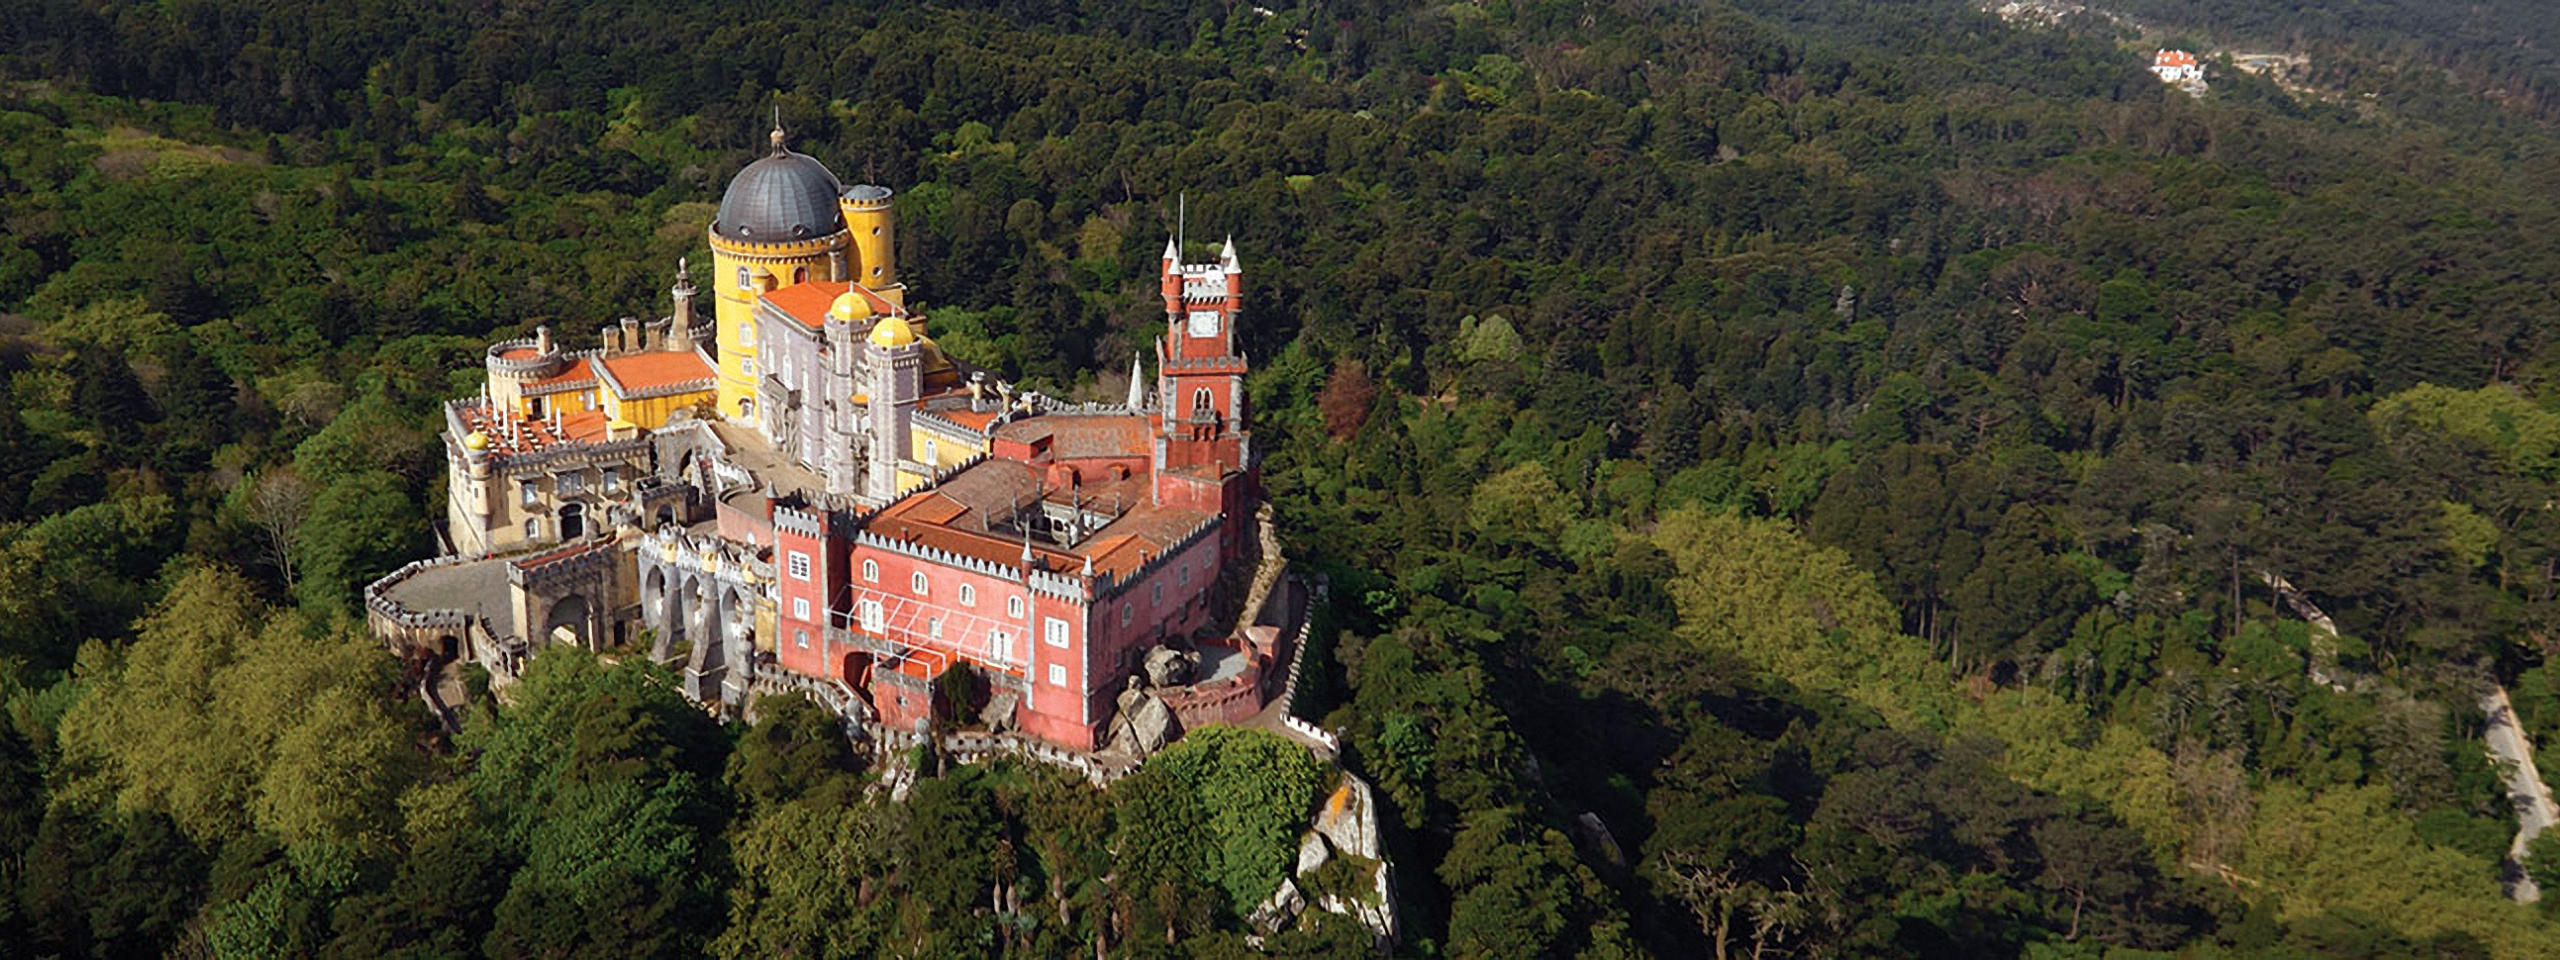 Birdview of Pena palace (Old remodelled Monastery in red and New Palace in yellow)